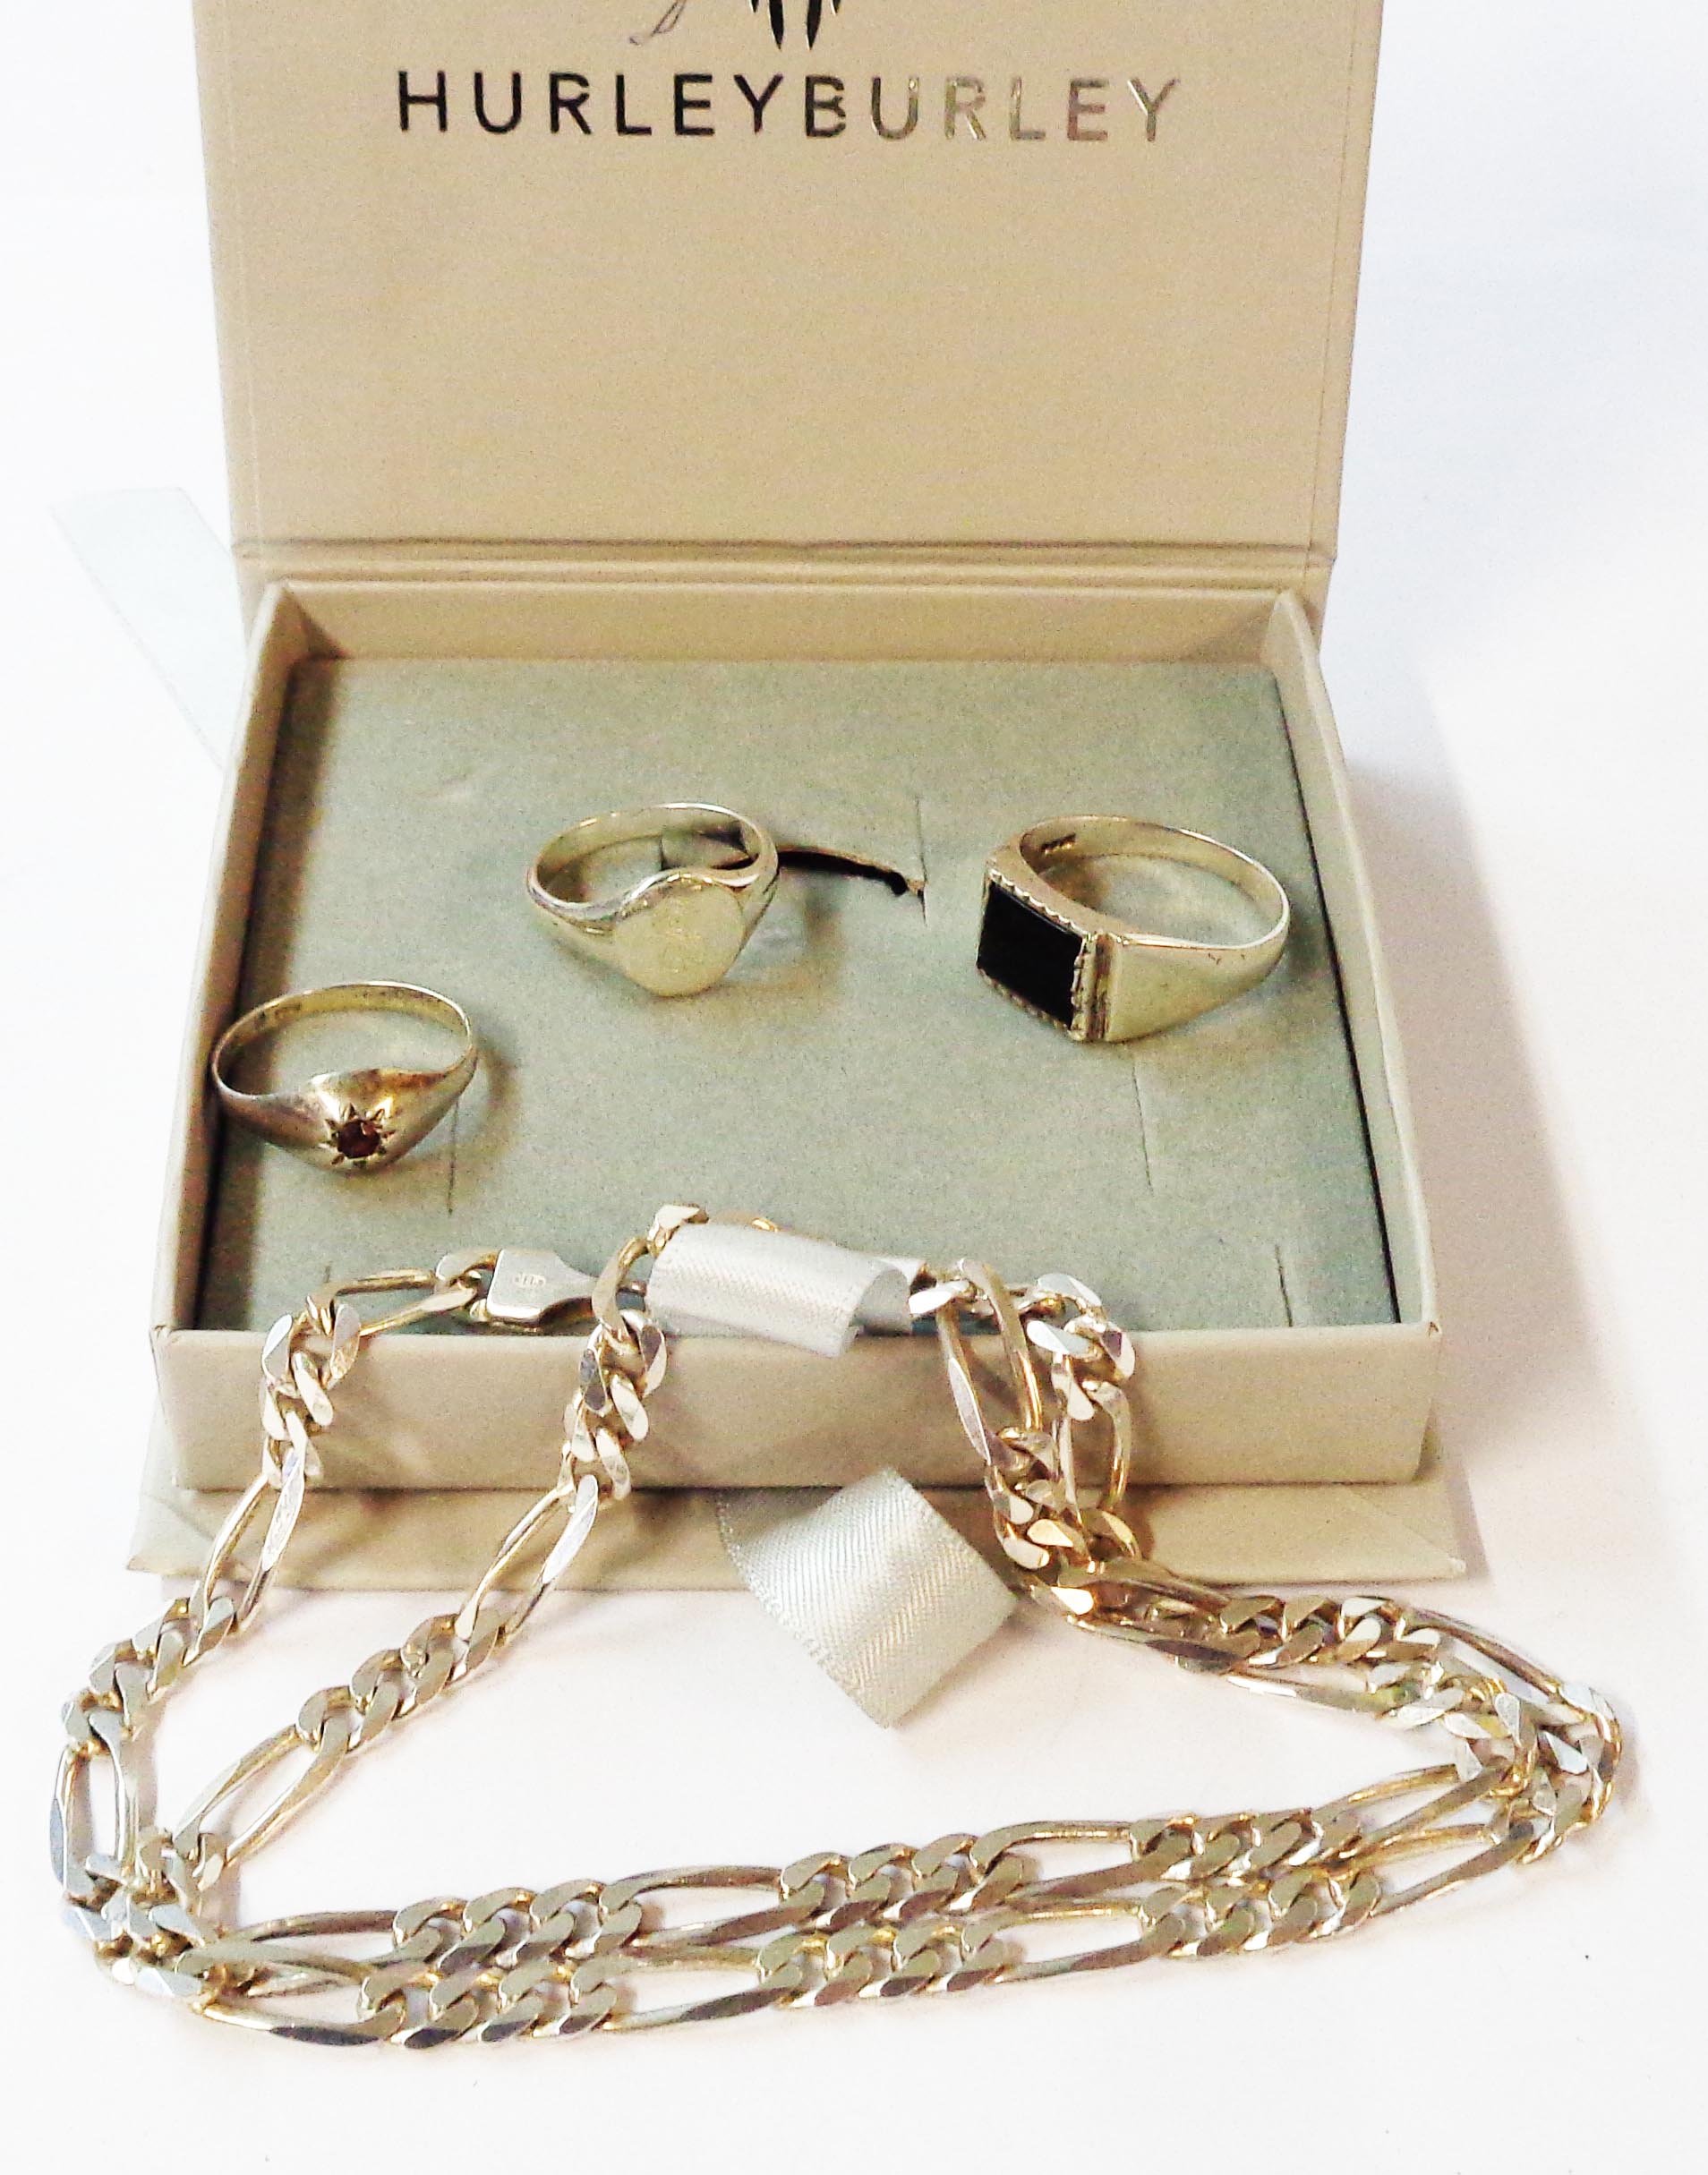 A 'Hurleyburley' box containing a convention marked 925 silver part kerb-link neck chain a silver